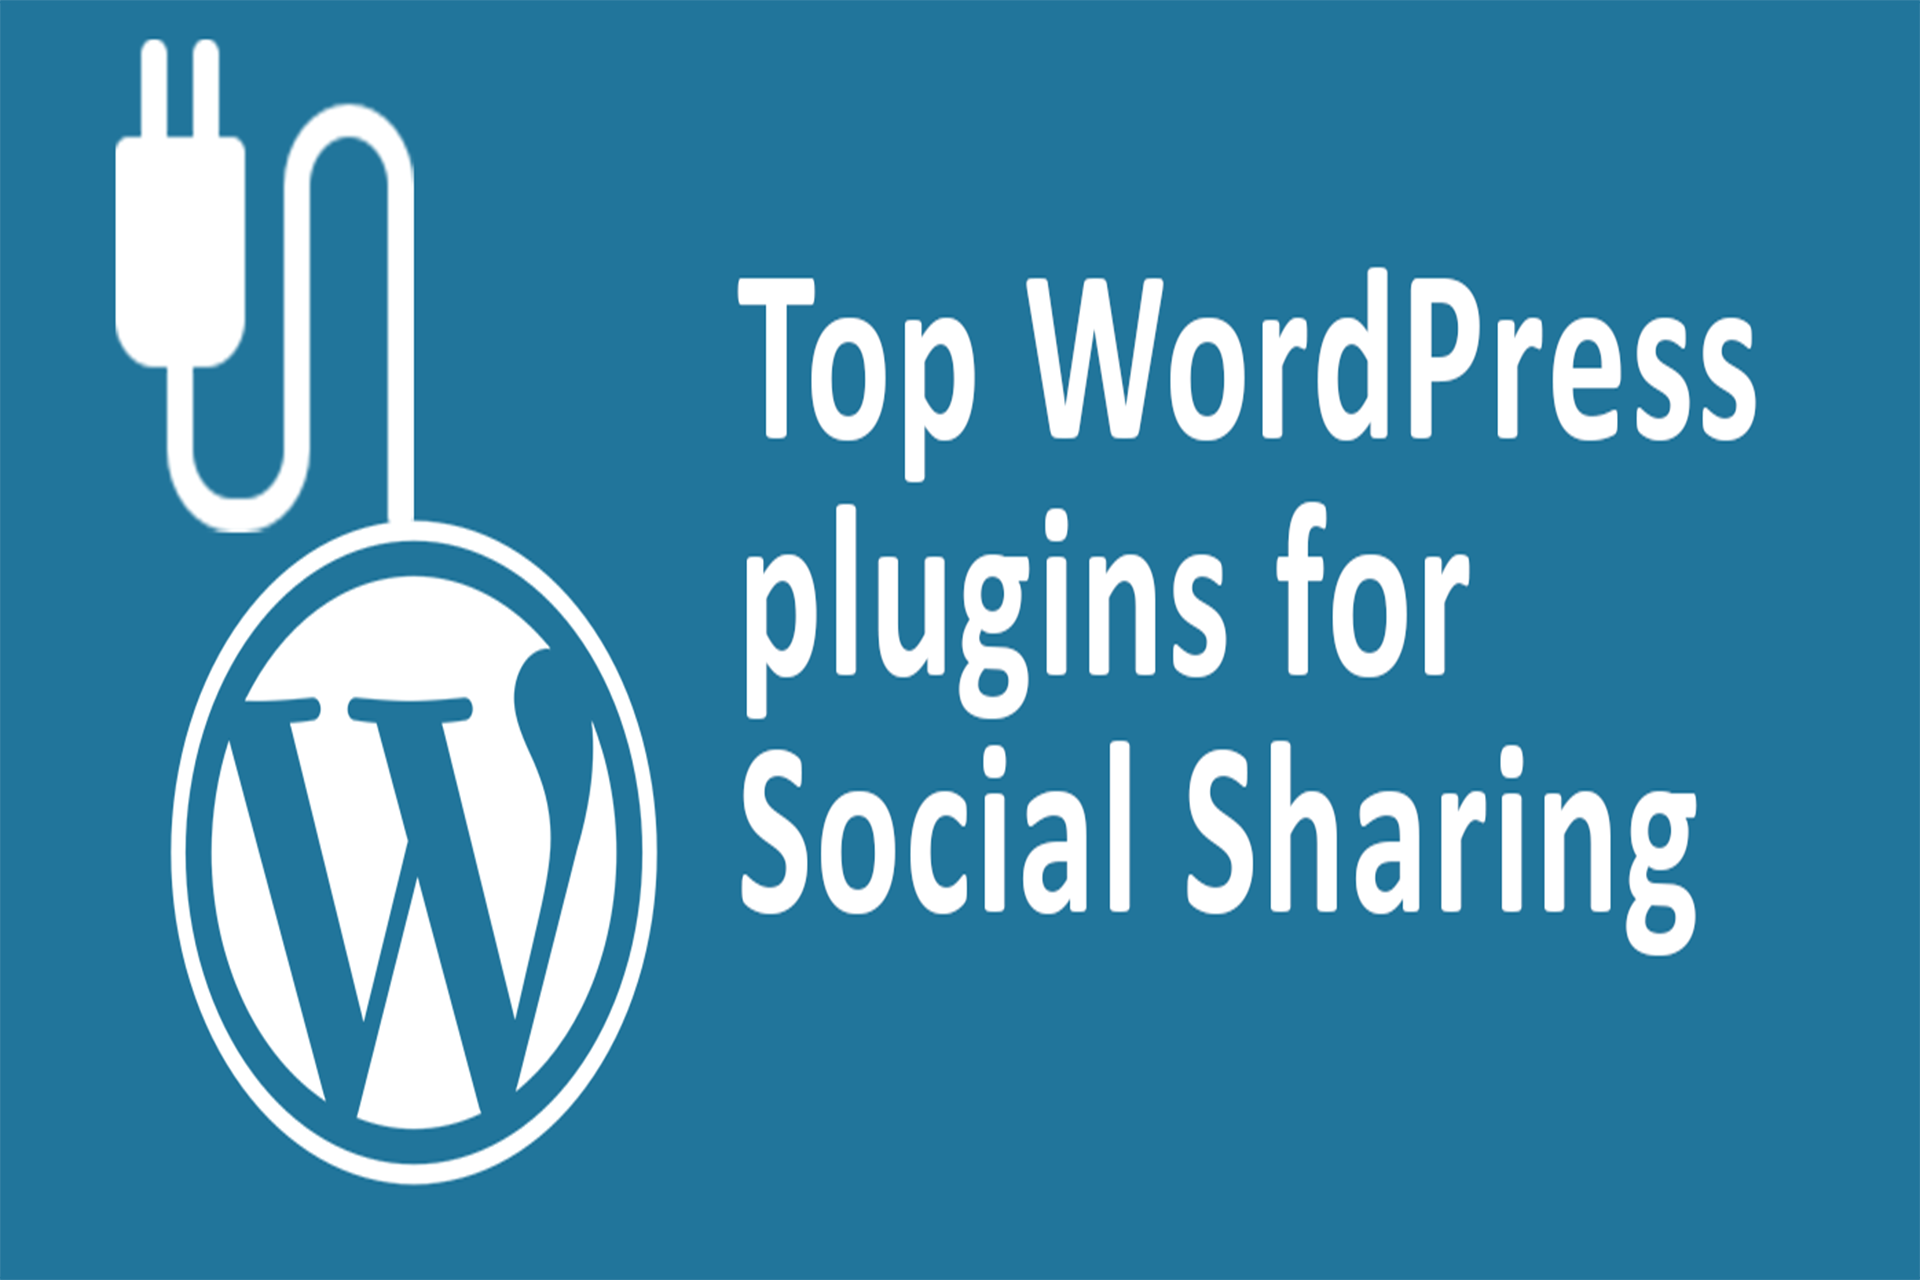 Top WordPress plugins for Social Sharing – options to choose from